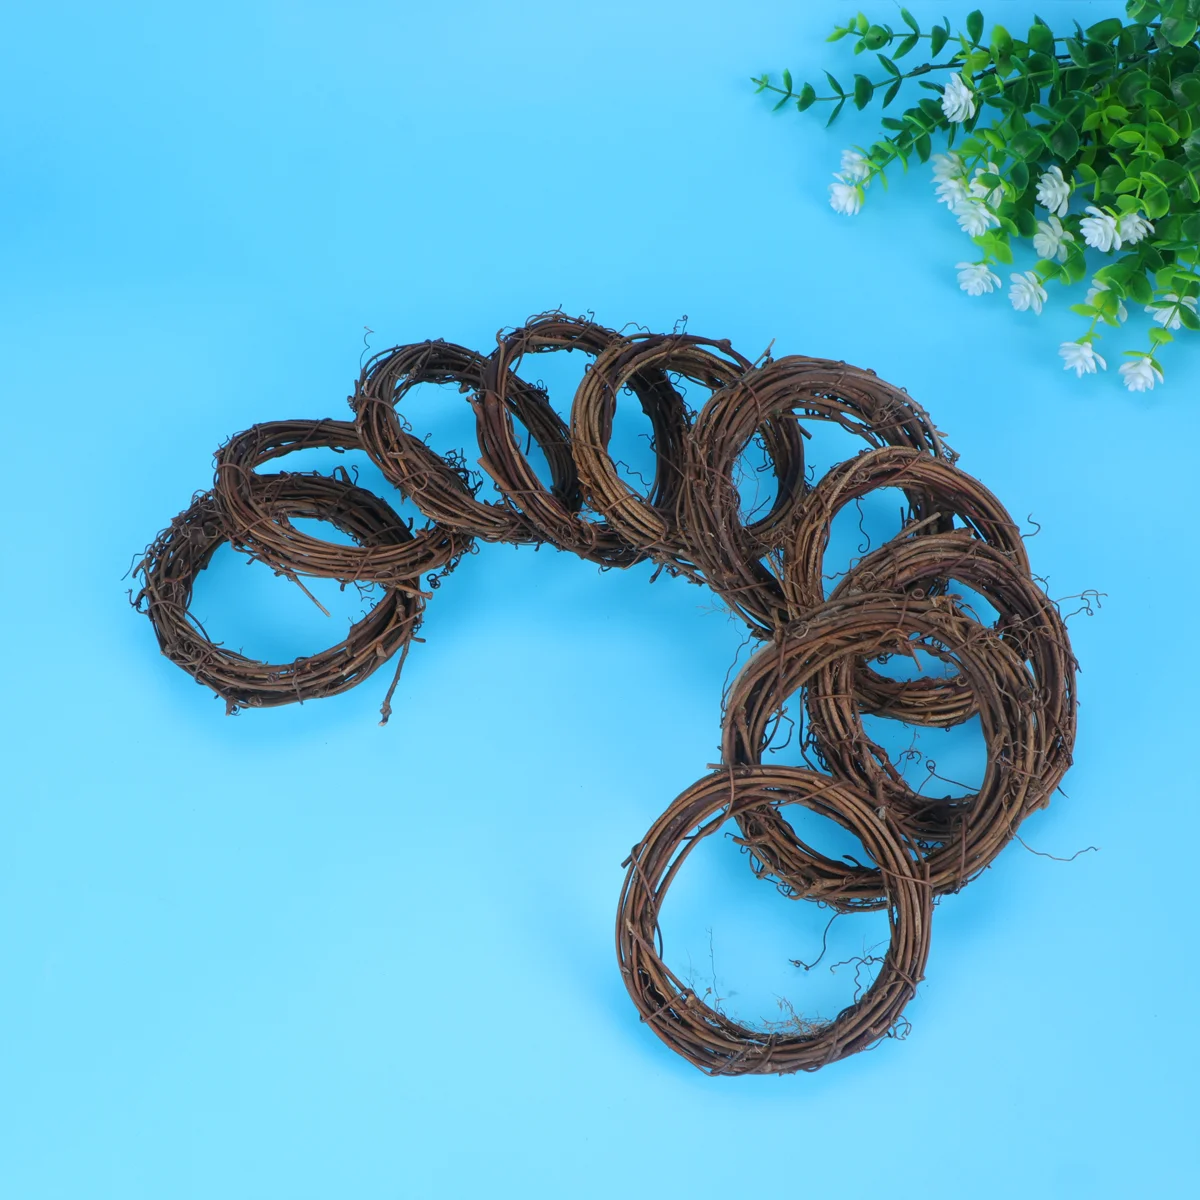 

Wreath Rattan Grapevine Ring Vine Natural Diy Garland Twig Crafts Wreaths Christmas Branch Dried Decorative Rings Door Party